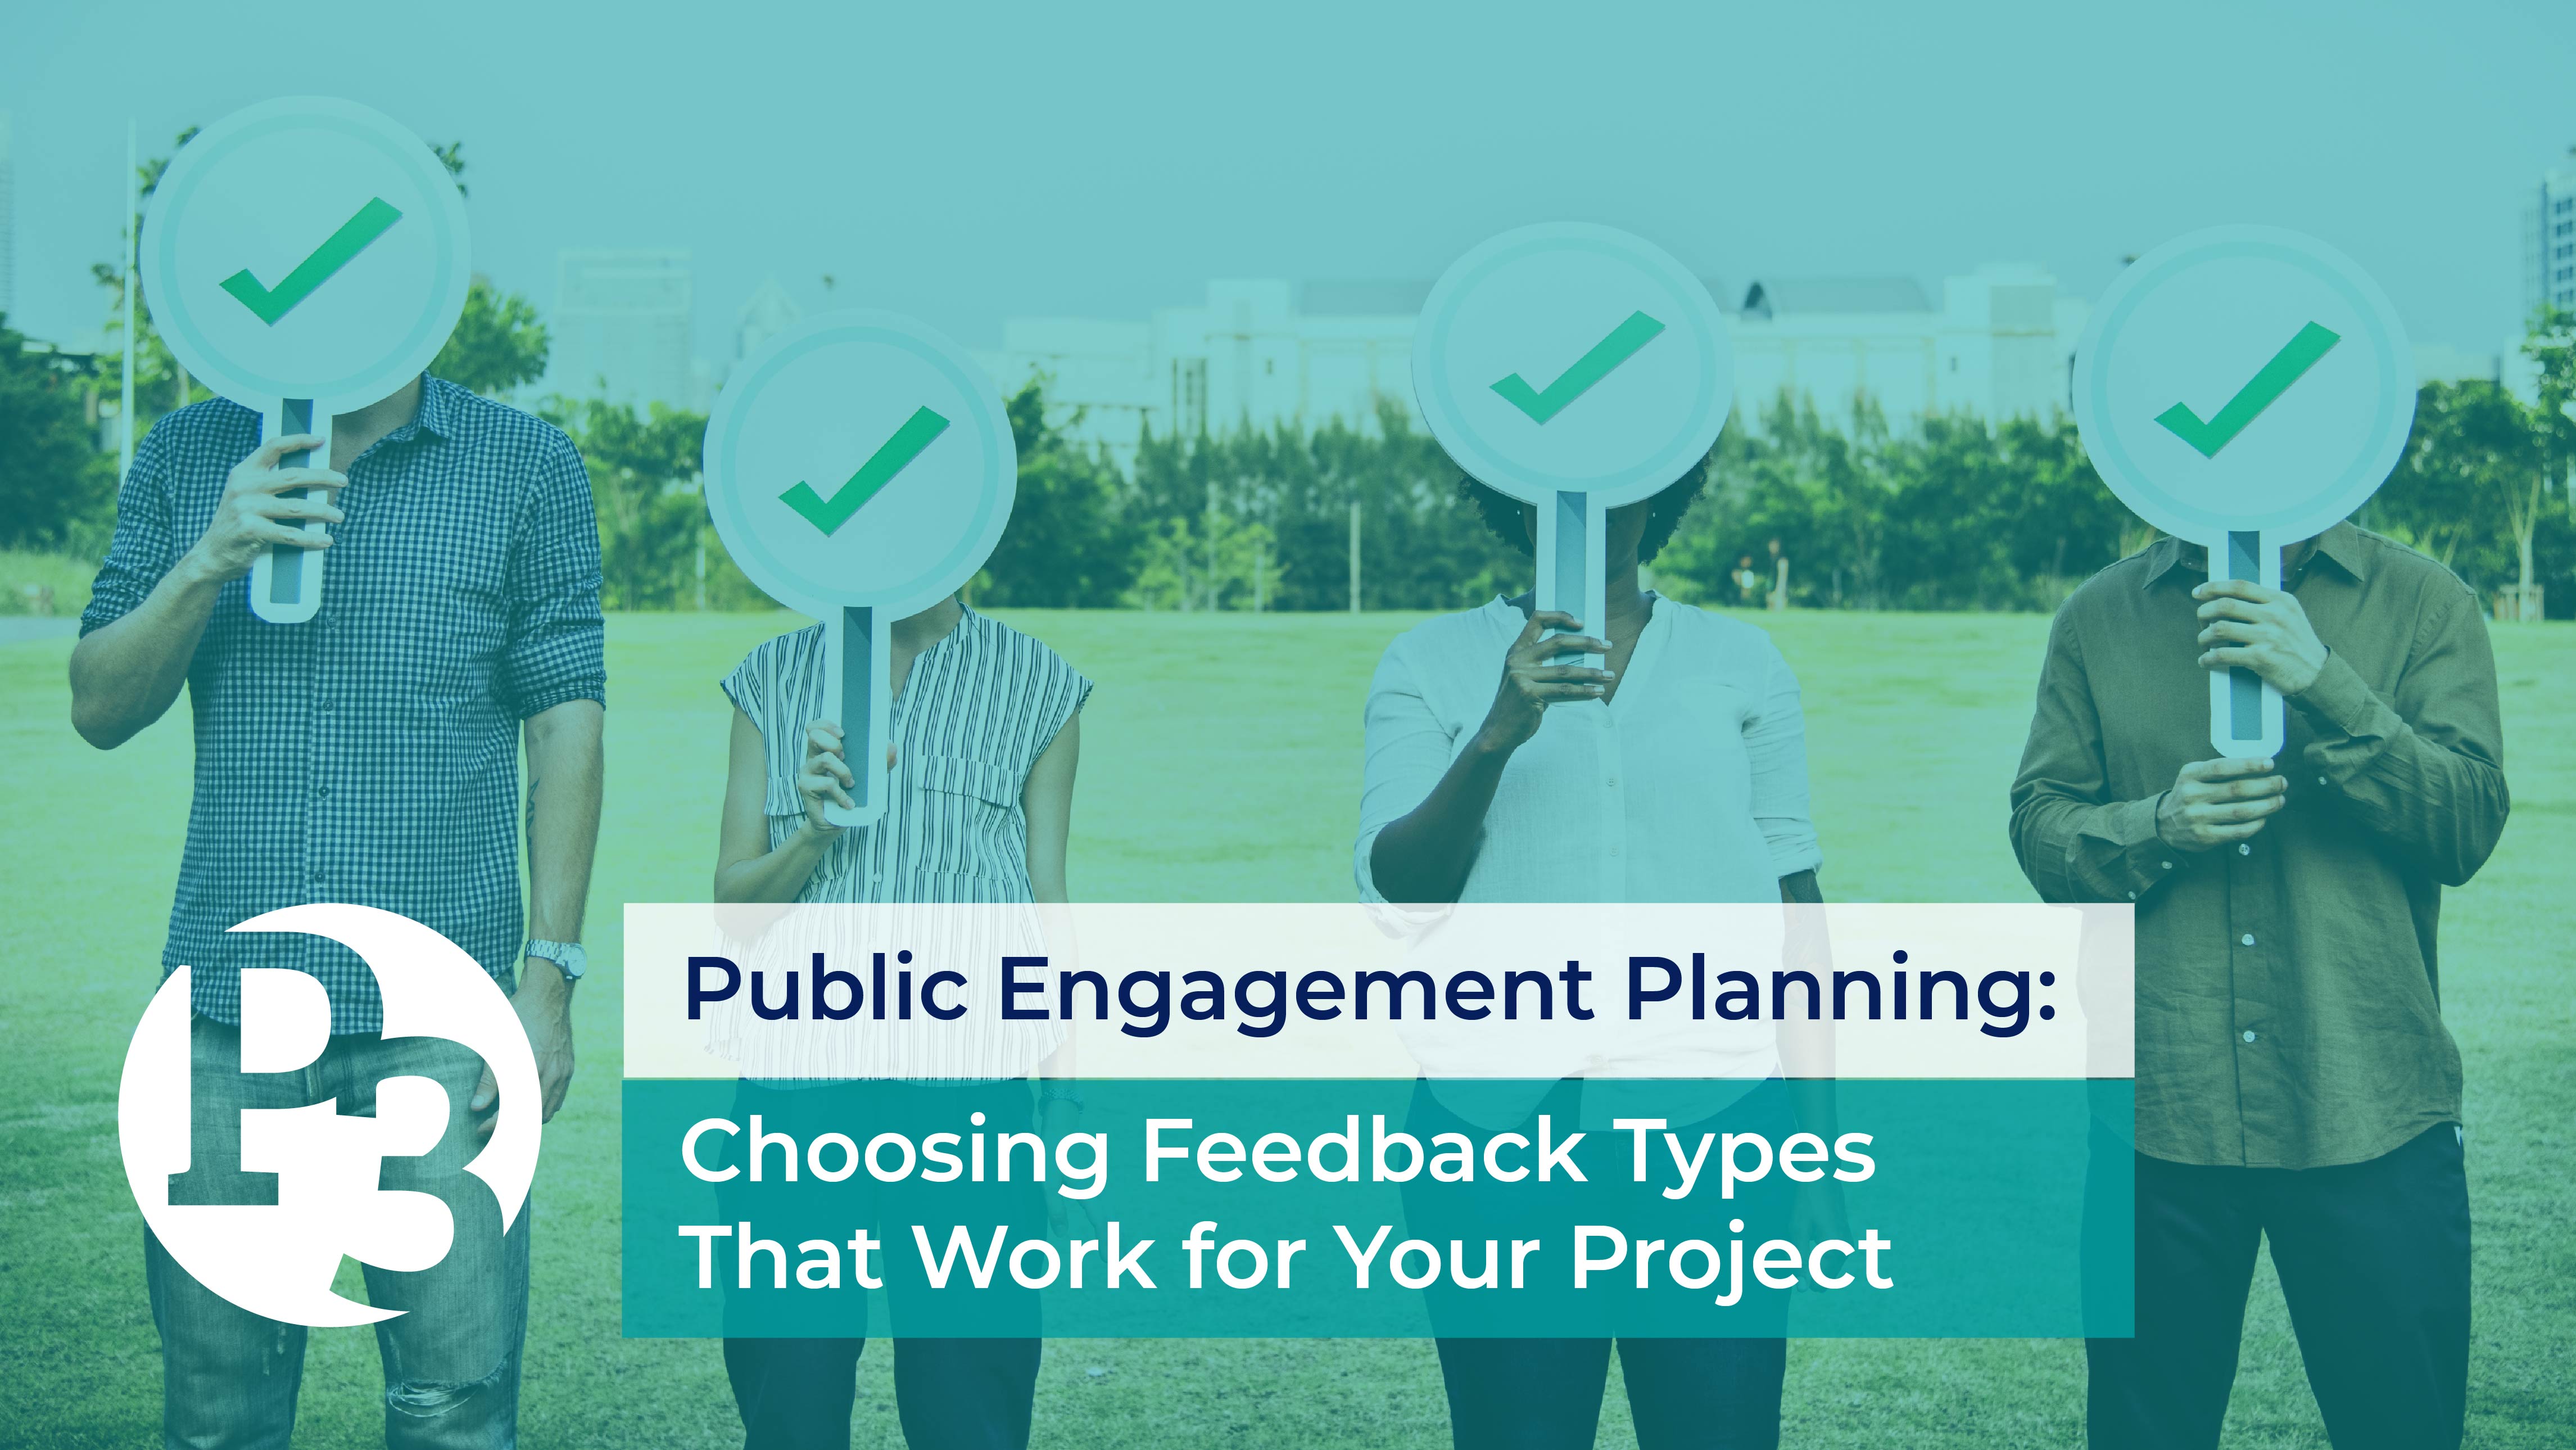 Public Engagement Planning: Choosing Feedback Types that Work for Your Project